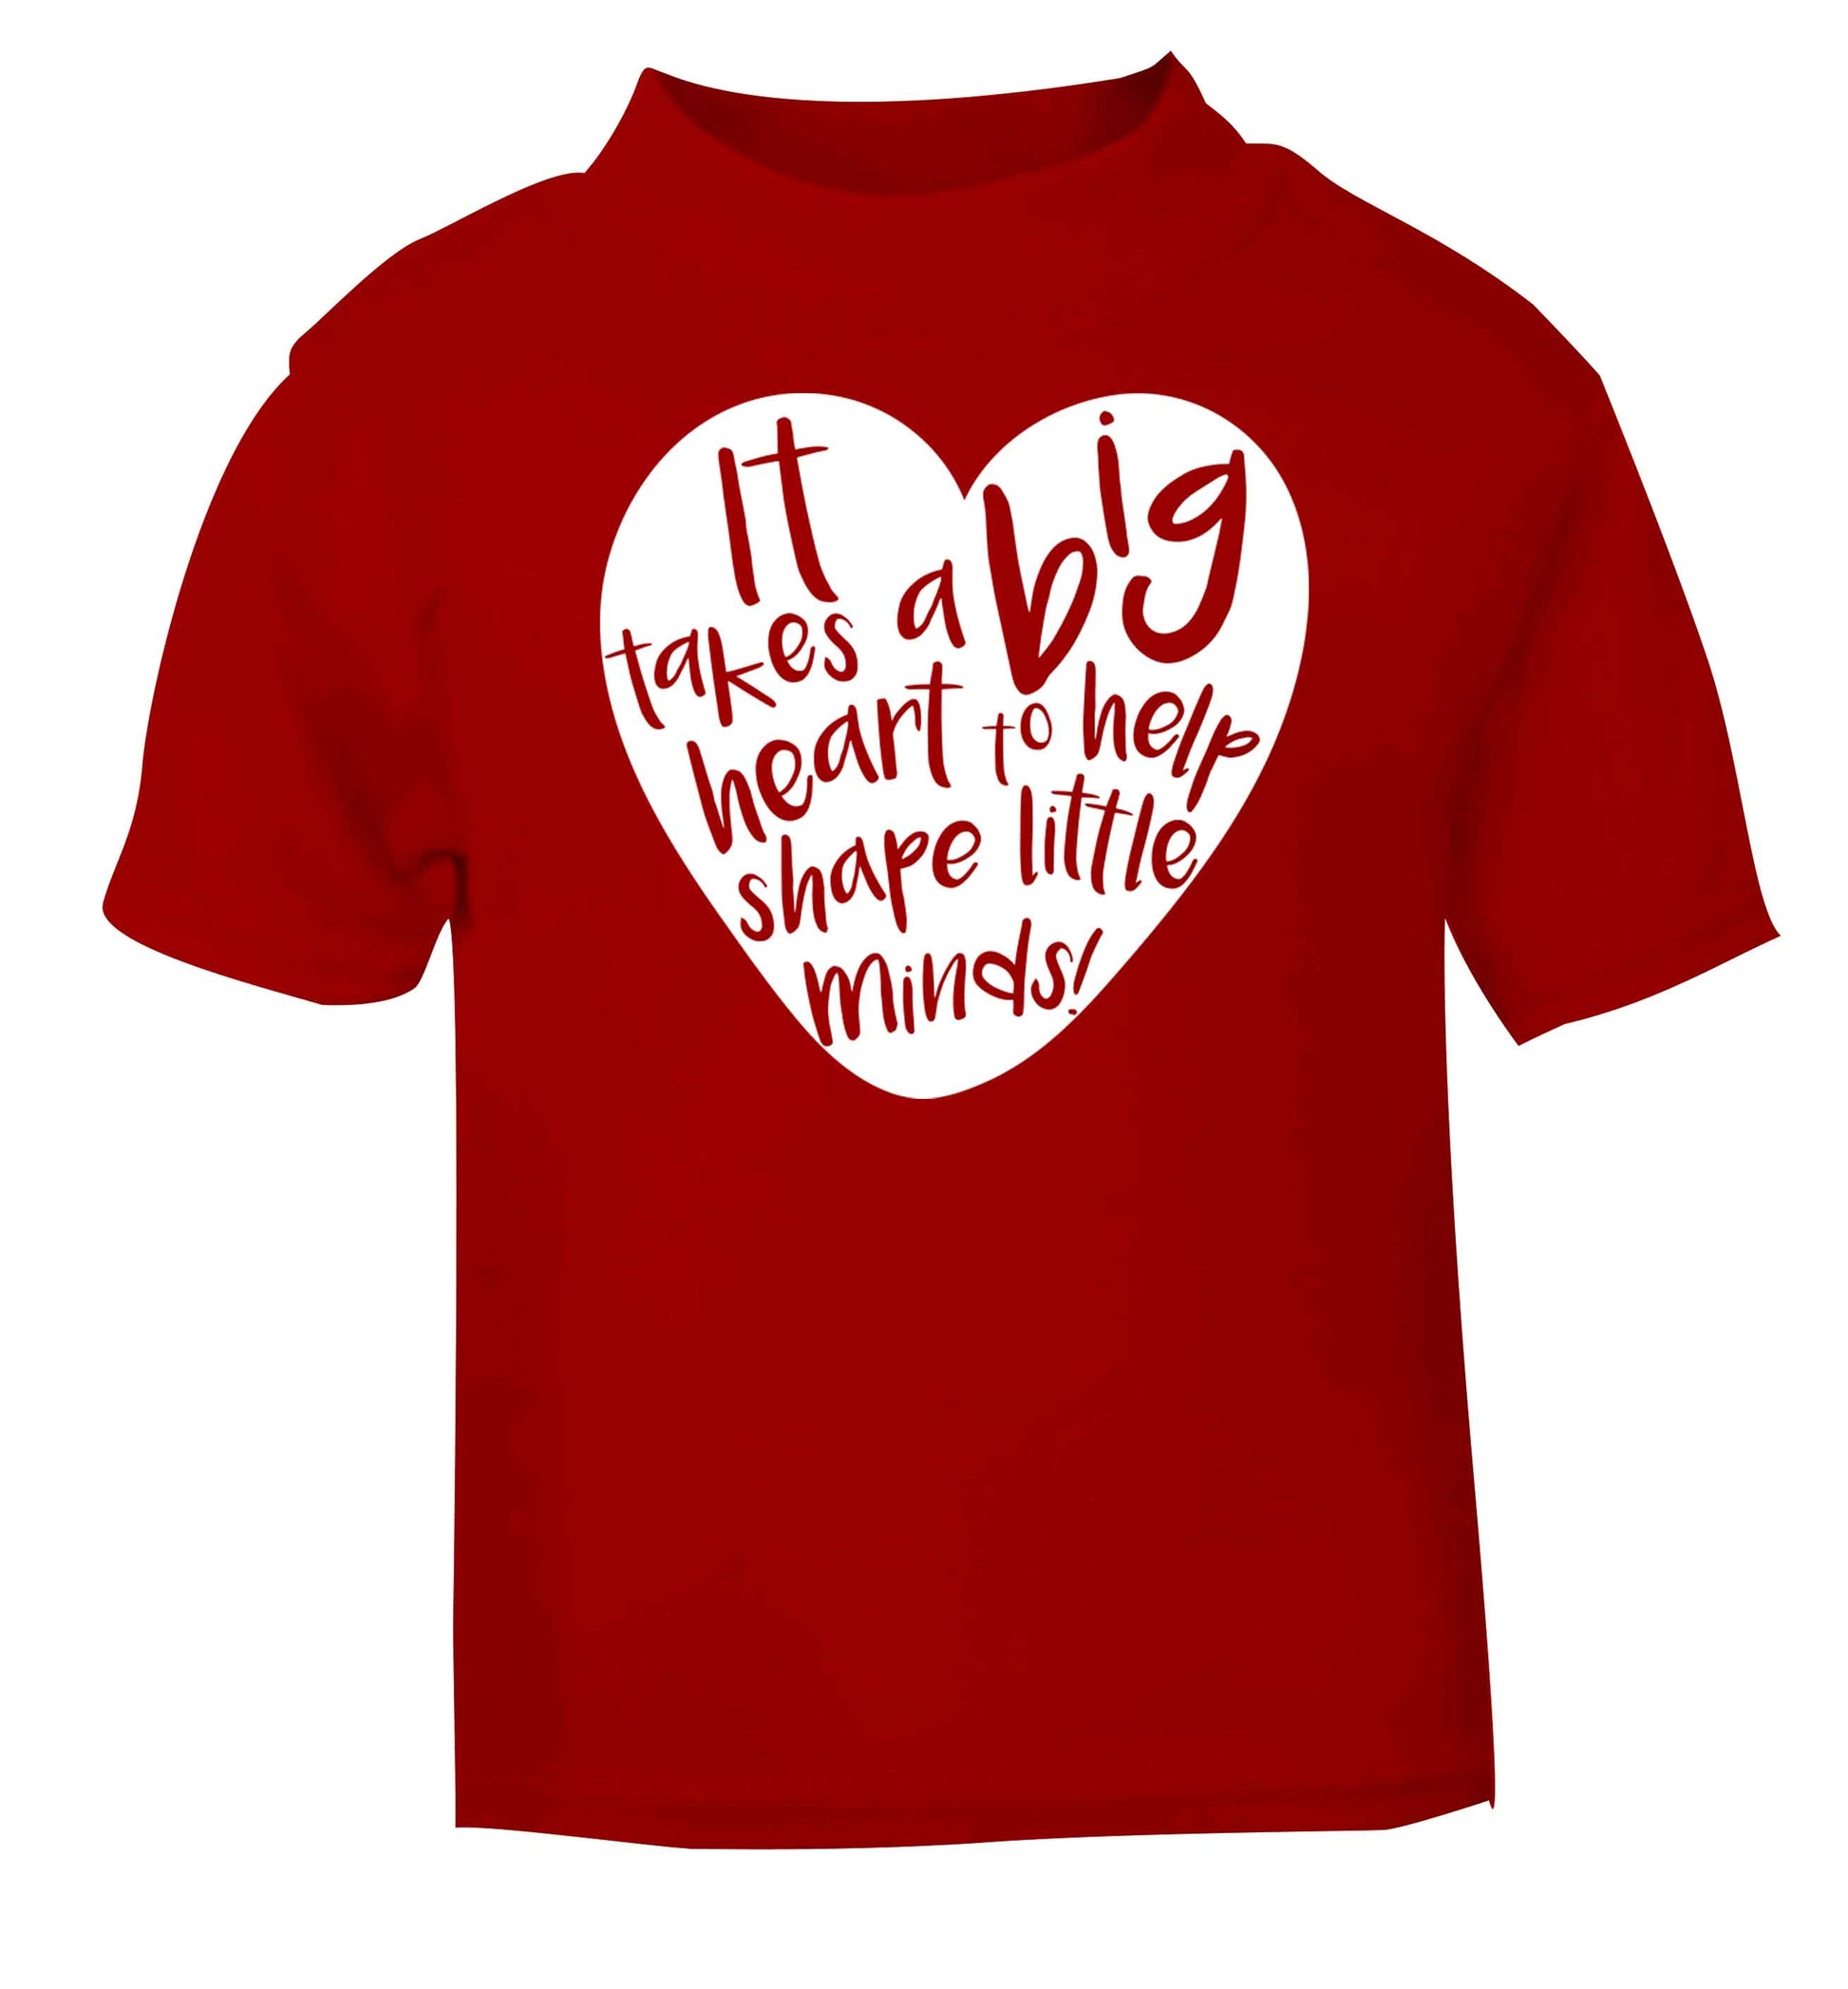 It takes a big heart to help shape little minds red baby toddler Tshirt 2 Years